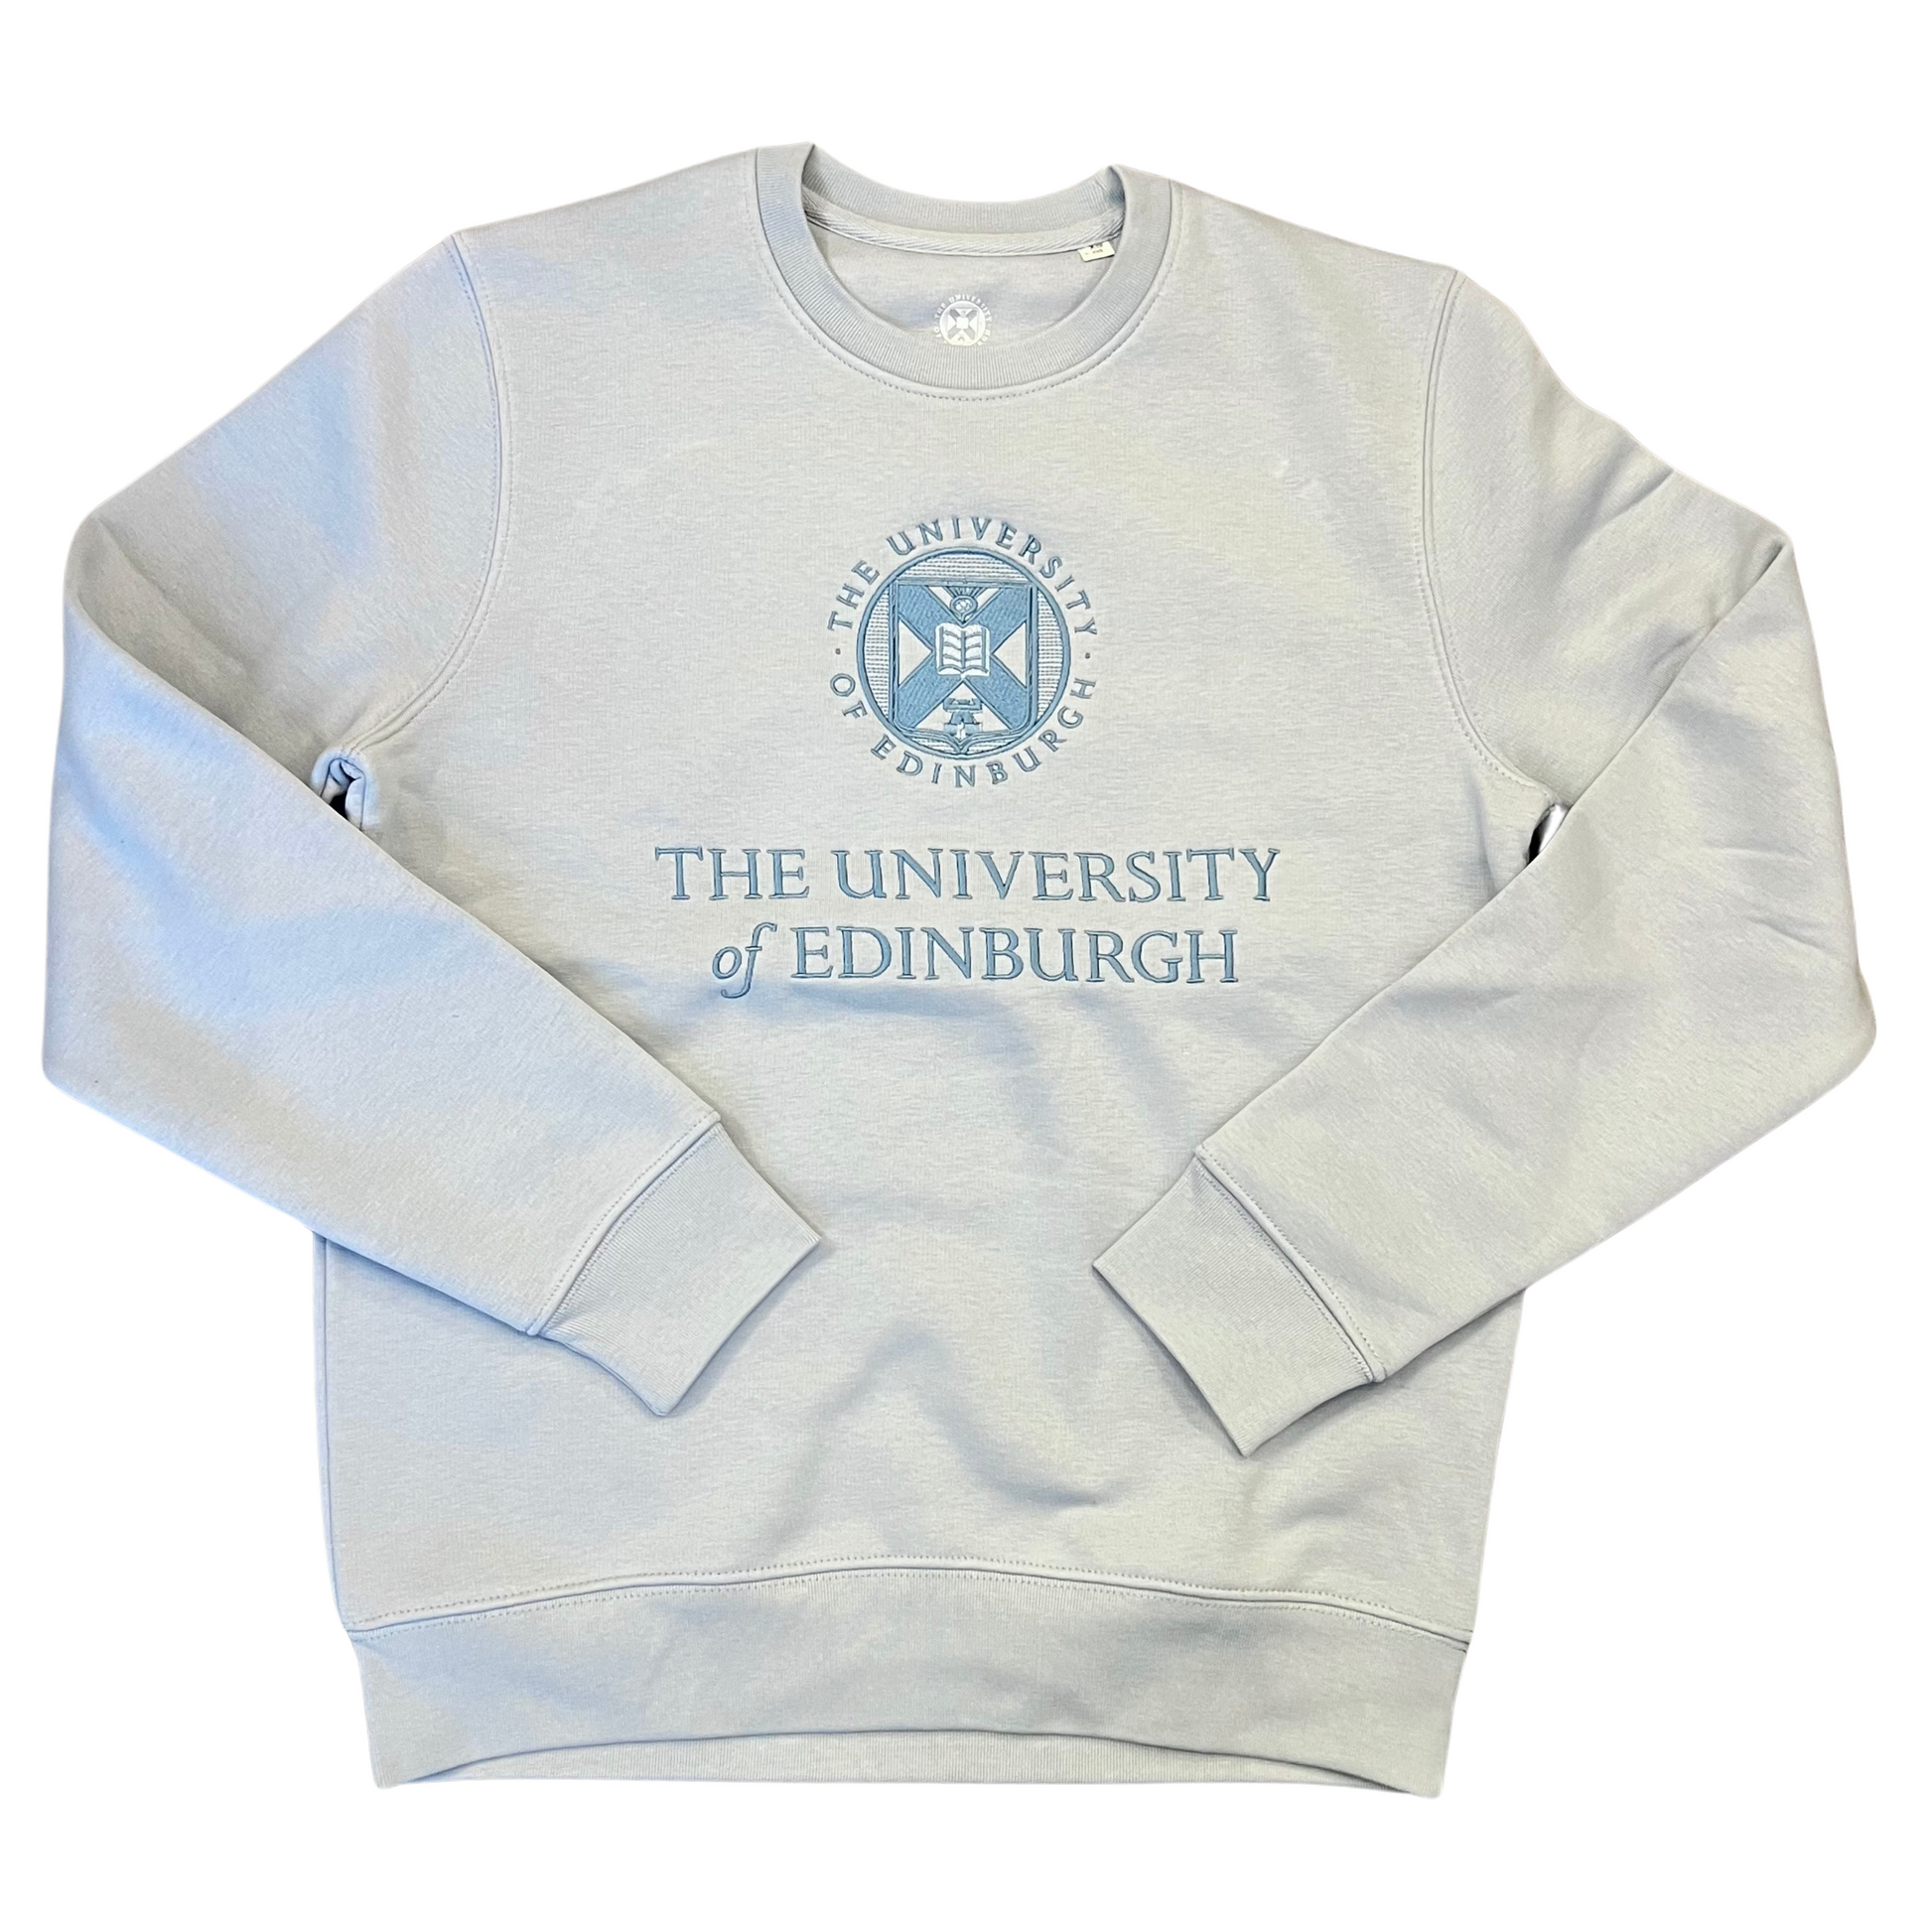 light blue tonal crewneck sweatshirt with a blue embroidered university crest and name in the centre of the sweater